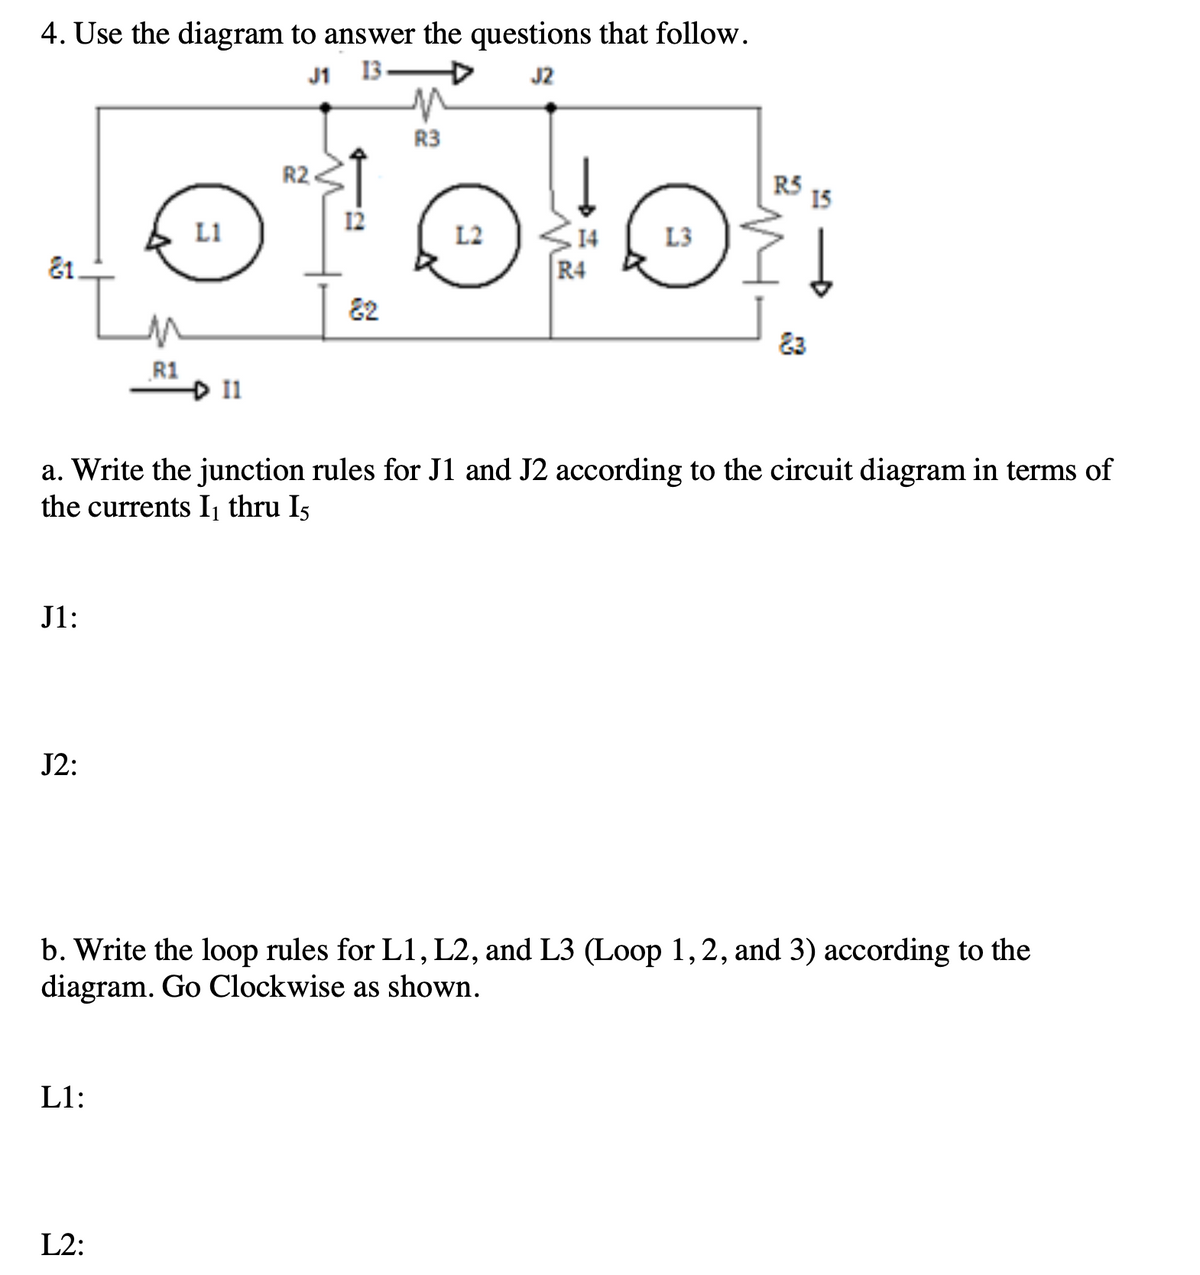 4. Use the diagram to answer the questions that follow.
4.
J1
13
J2
R3
R2
R5
15
L1
14
R4
L2
L3
81.
In
82
R1
D 11
a. Write the junction rules for J1 and J2 according to the circuit diagram in terms of
the currents Ij thru I5
J1:
J2:
b. Write the loop rules for L1, L2, and L3 (Loop 1,2, and 3) according to the
diagram. Go Clockwise as shown.
L1:
L2:
